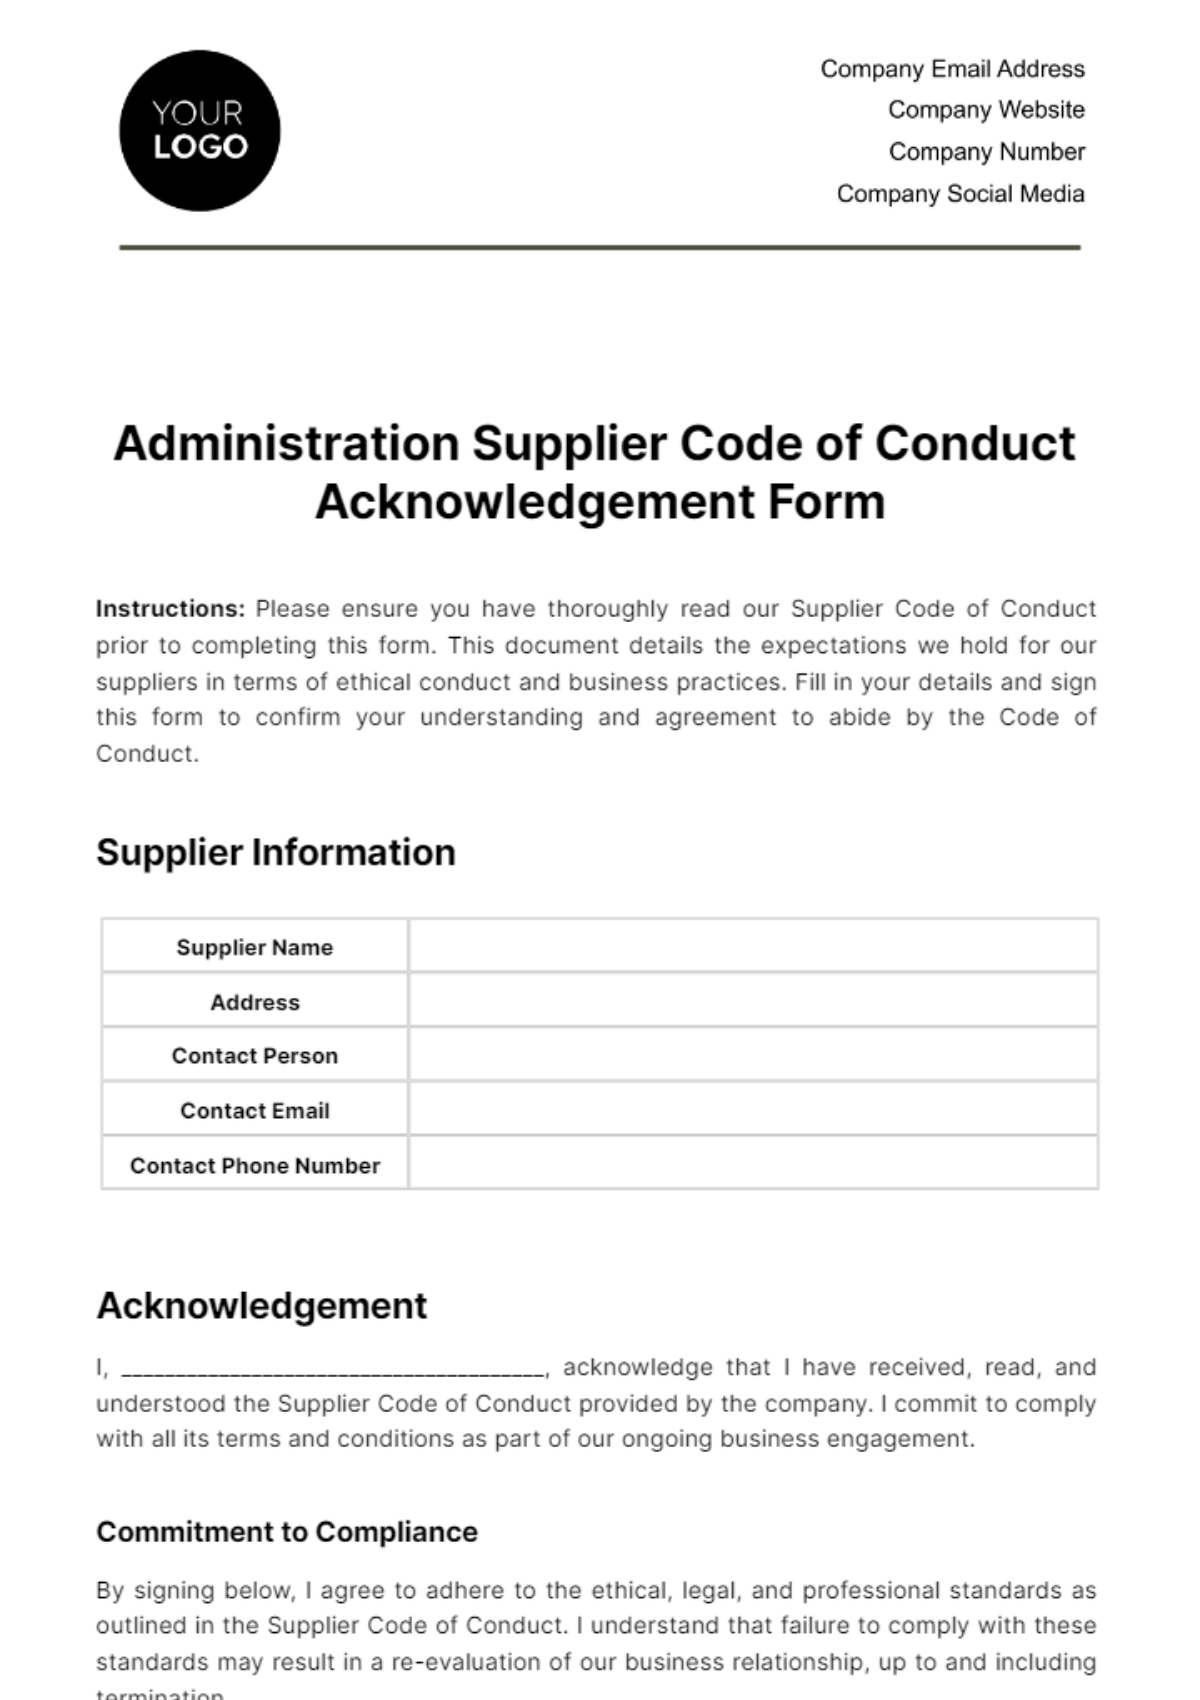 Administration Supplier Code of Conduct Acknowledgement Form Template